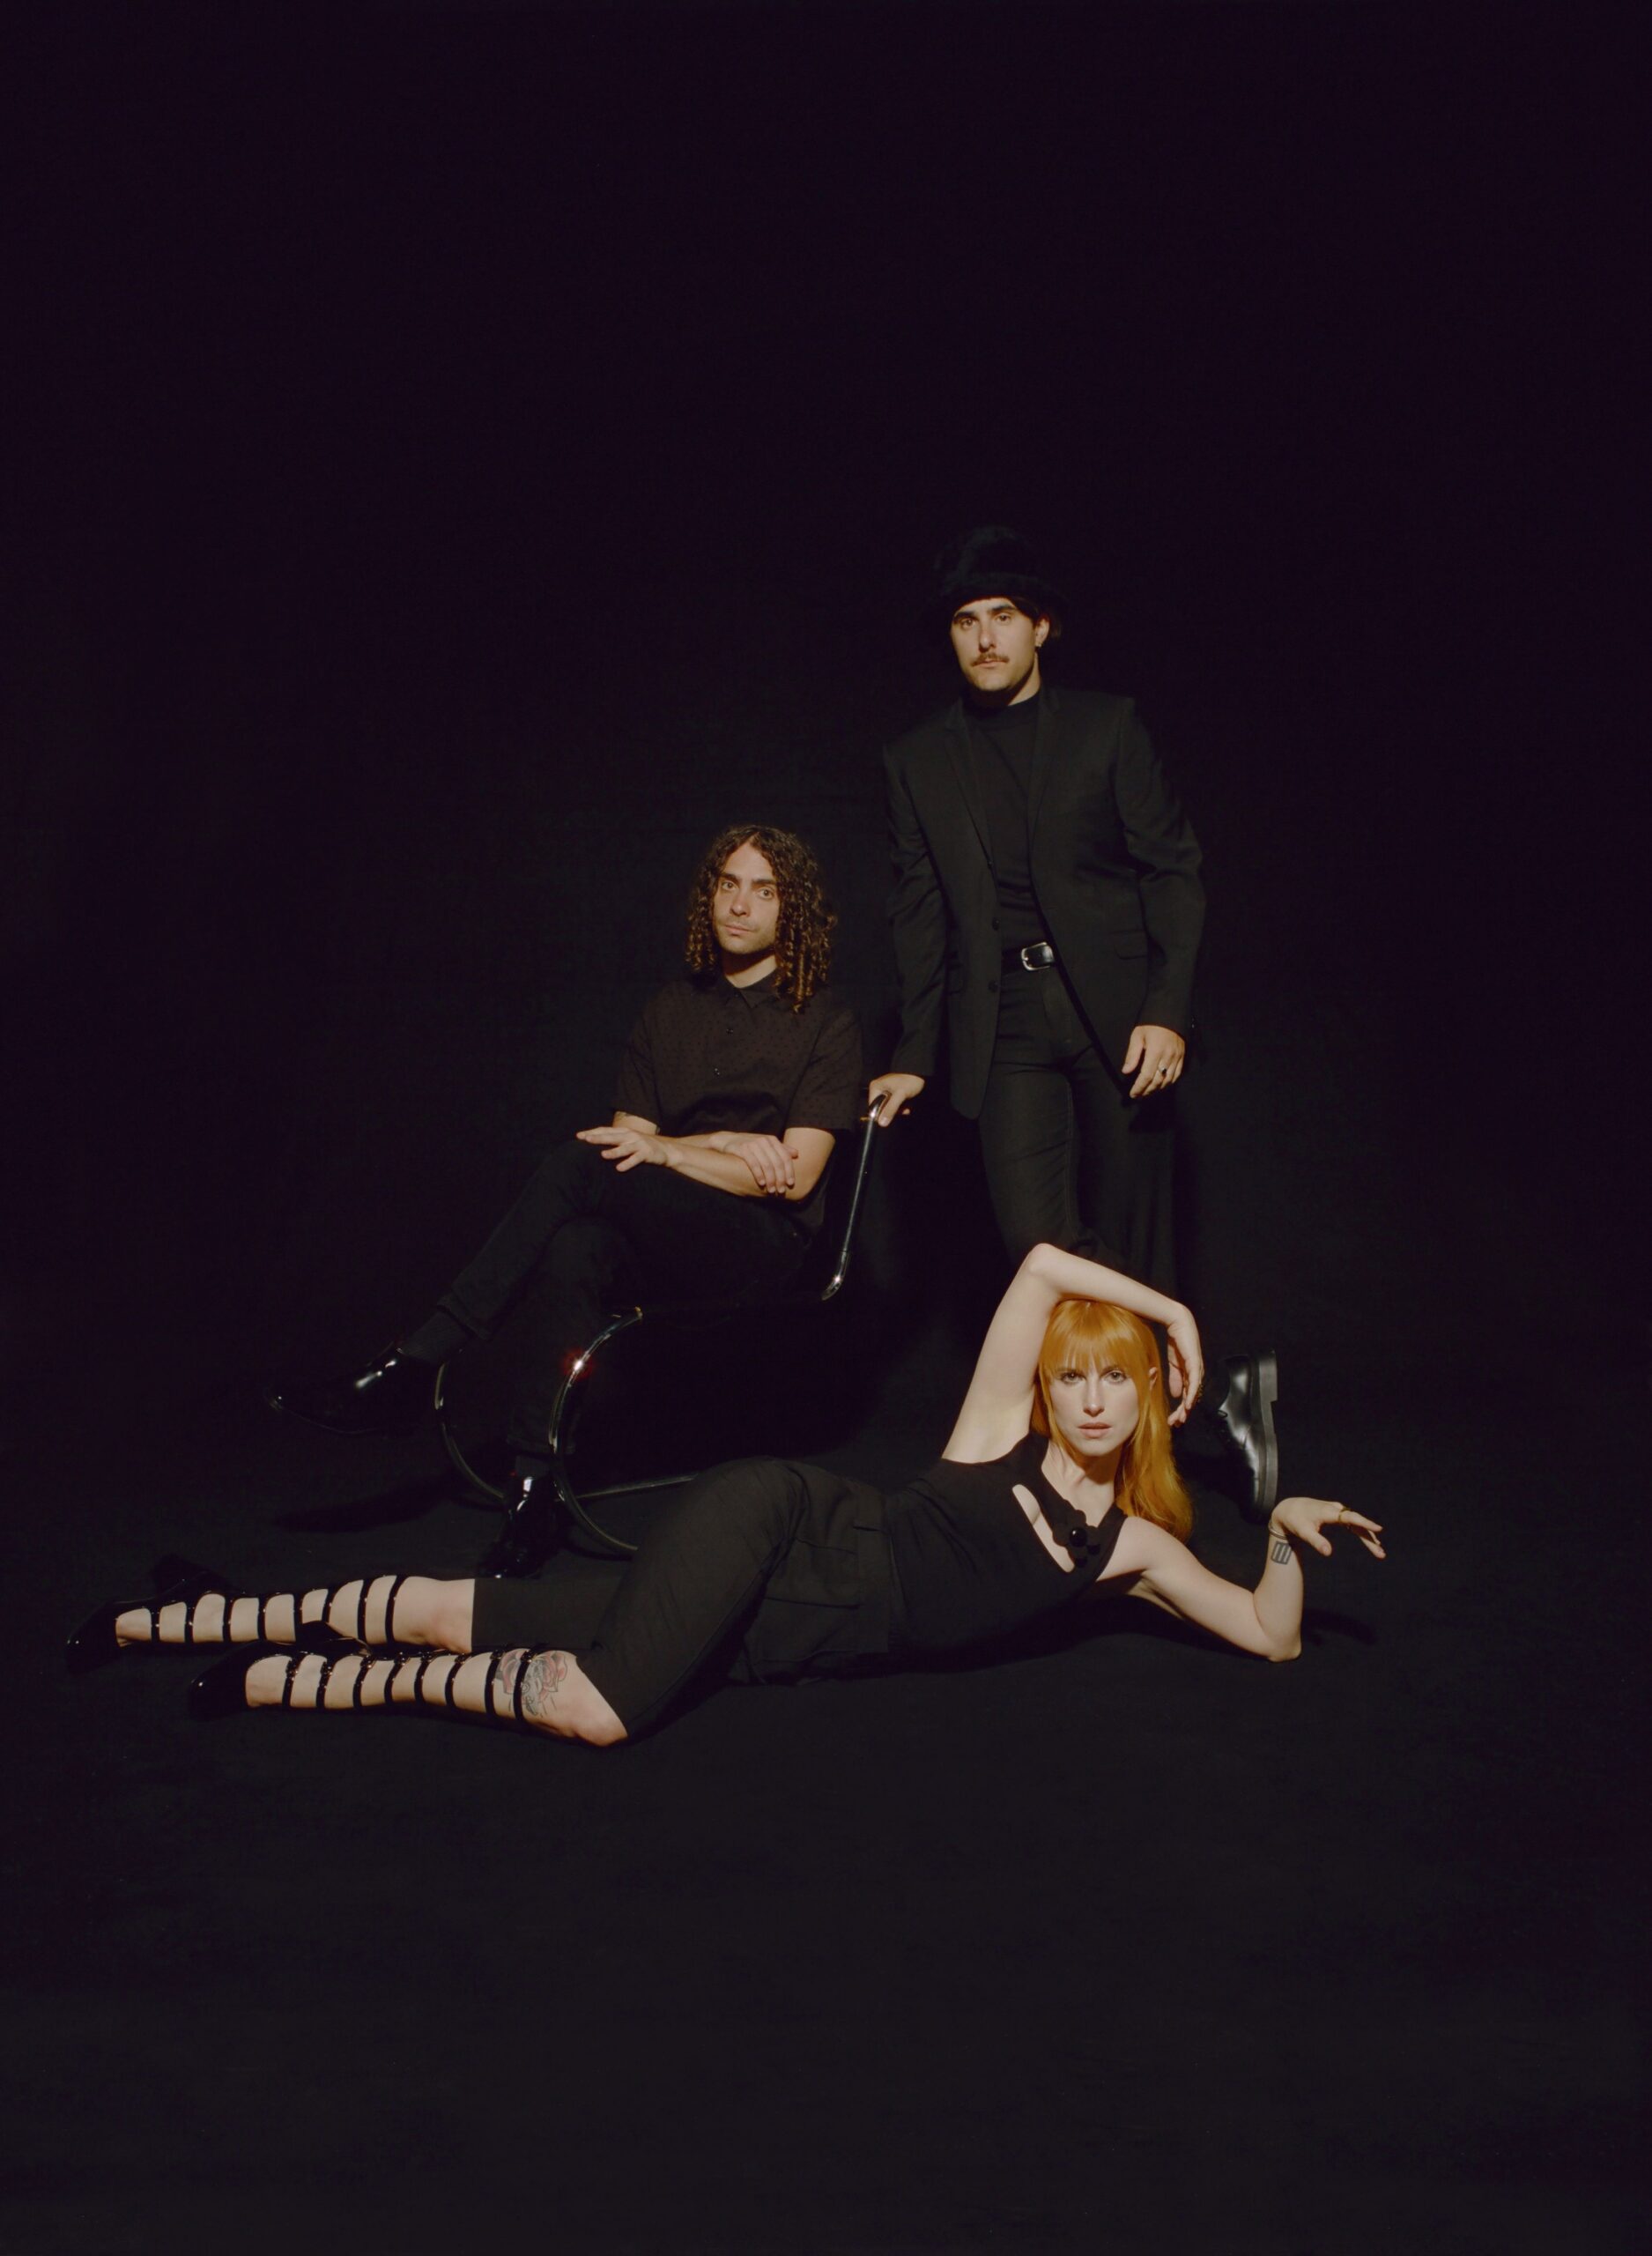 PARAMORE RELEASE NEW TRACK “C’EST COMME ÇA” | HIGHLY ANTICIPATED SIXTH STUDIO ALBUM ‘THIS IS WHY’ OUT FEBRUARY 10